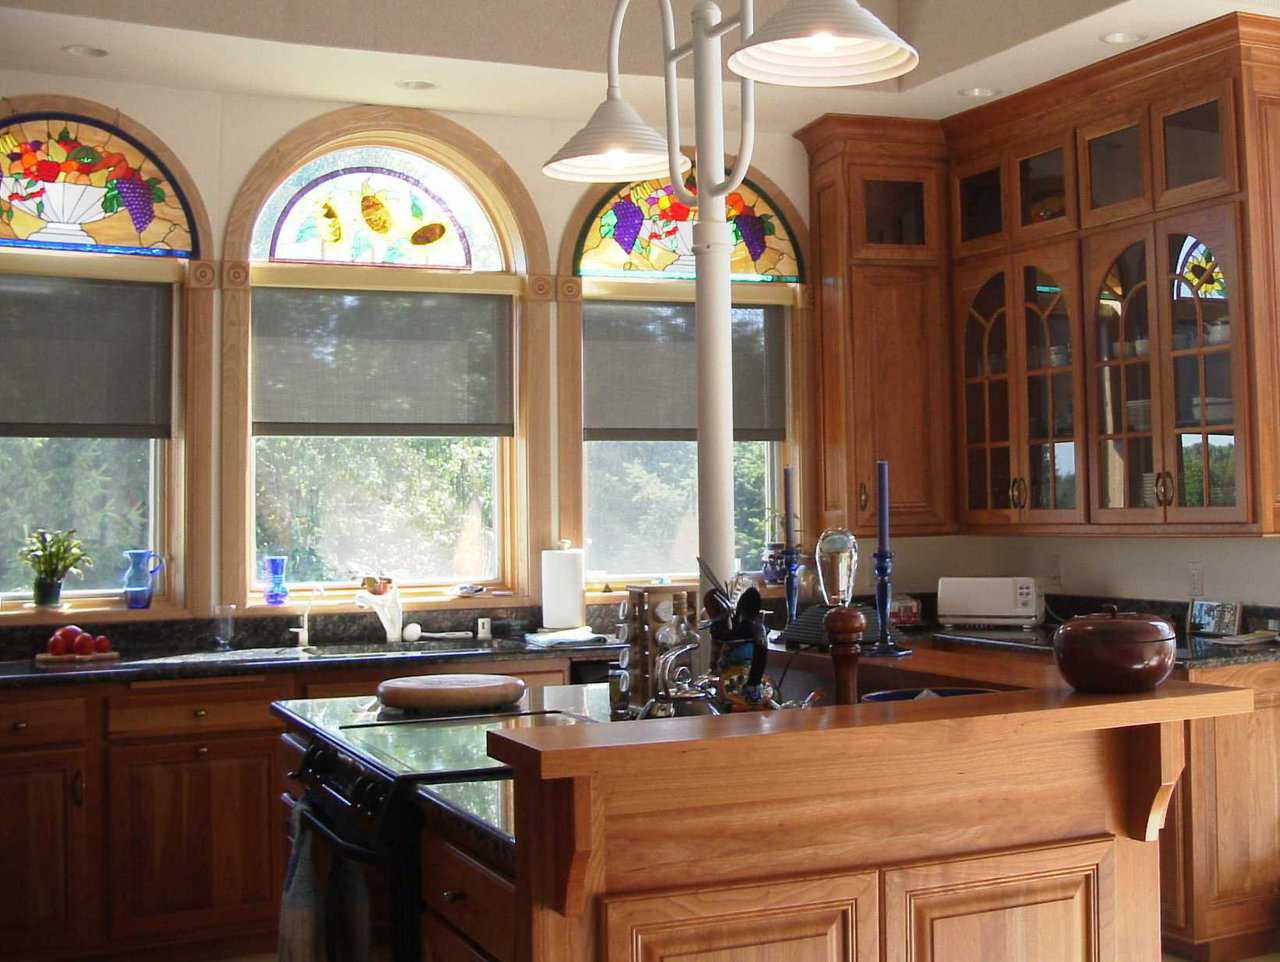 Gourmet Fittings — The kitchen features custom cabinets and stained-glass windows.